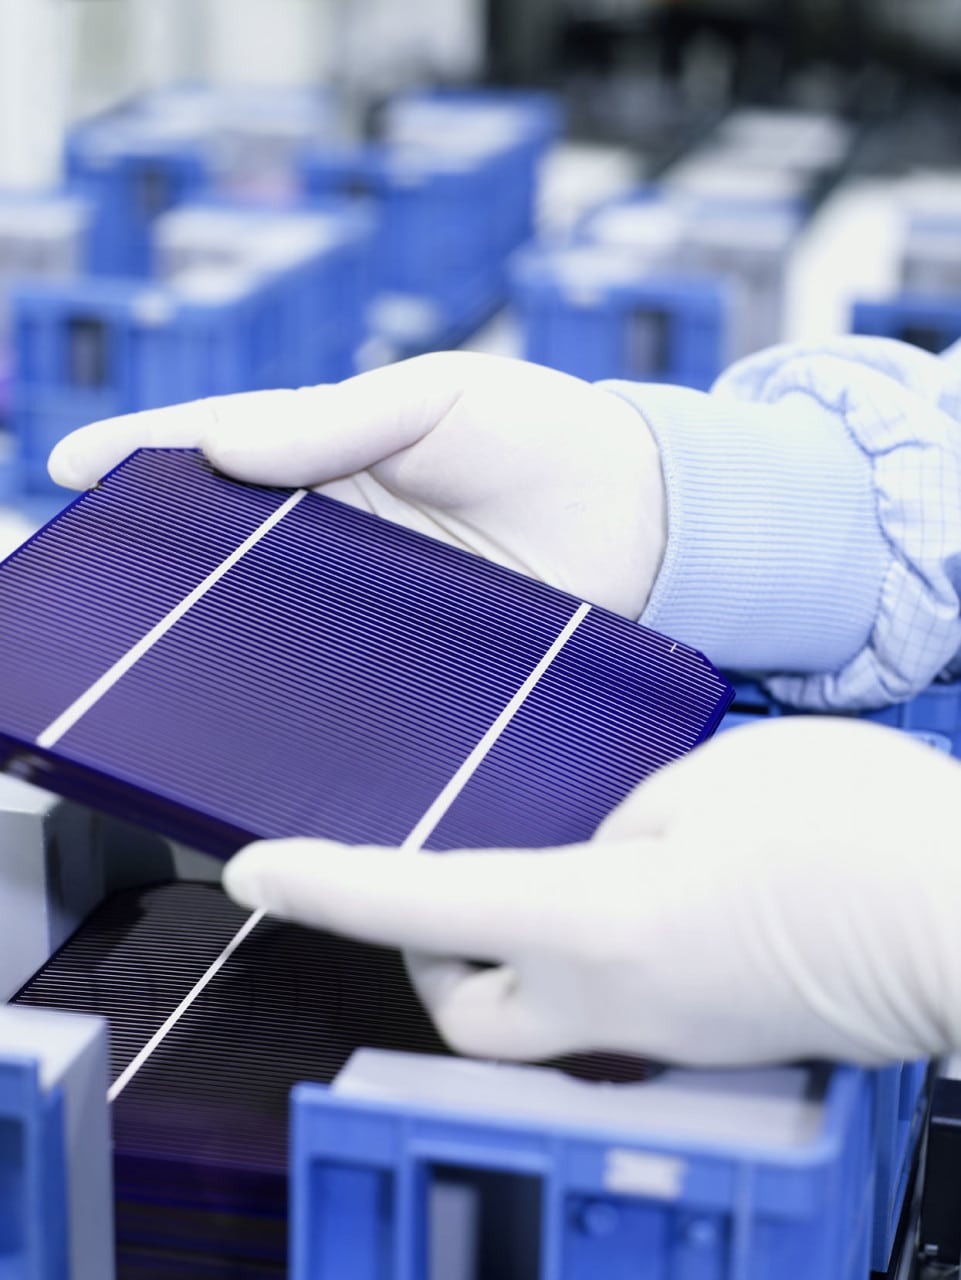 NREL Report: Cheaper Chinese Solar Panels Not Due to Low-Cost Labor, Subsidies